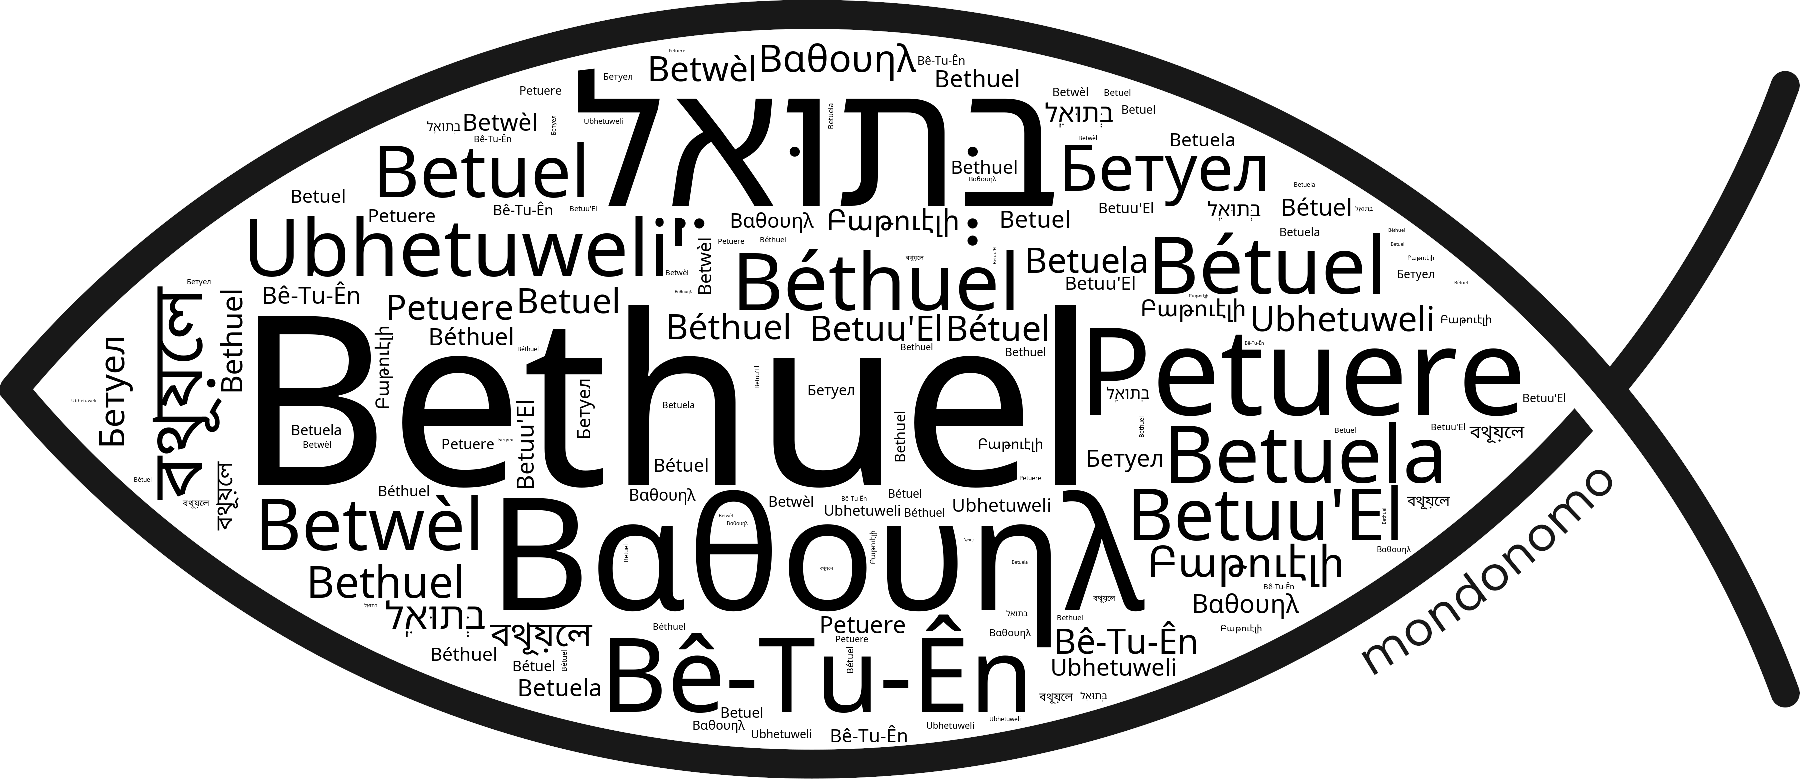 Name Bethuel in the world's Bibles